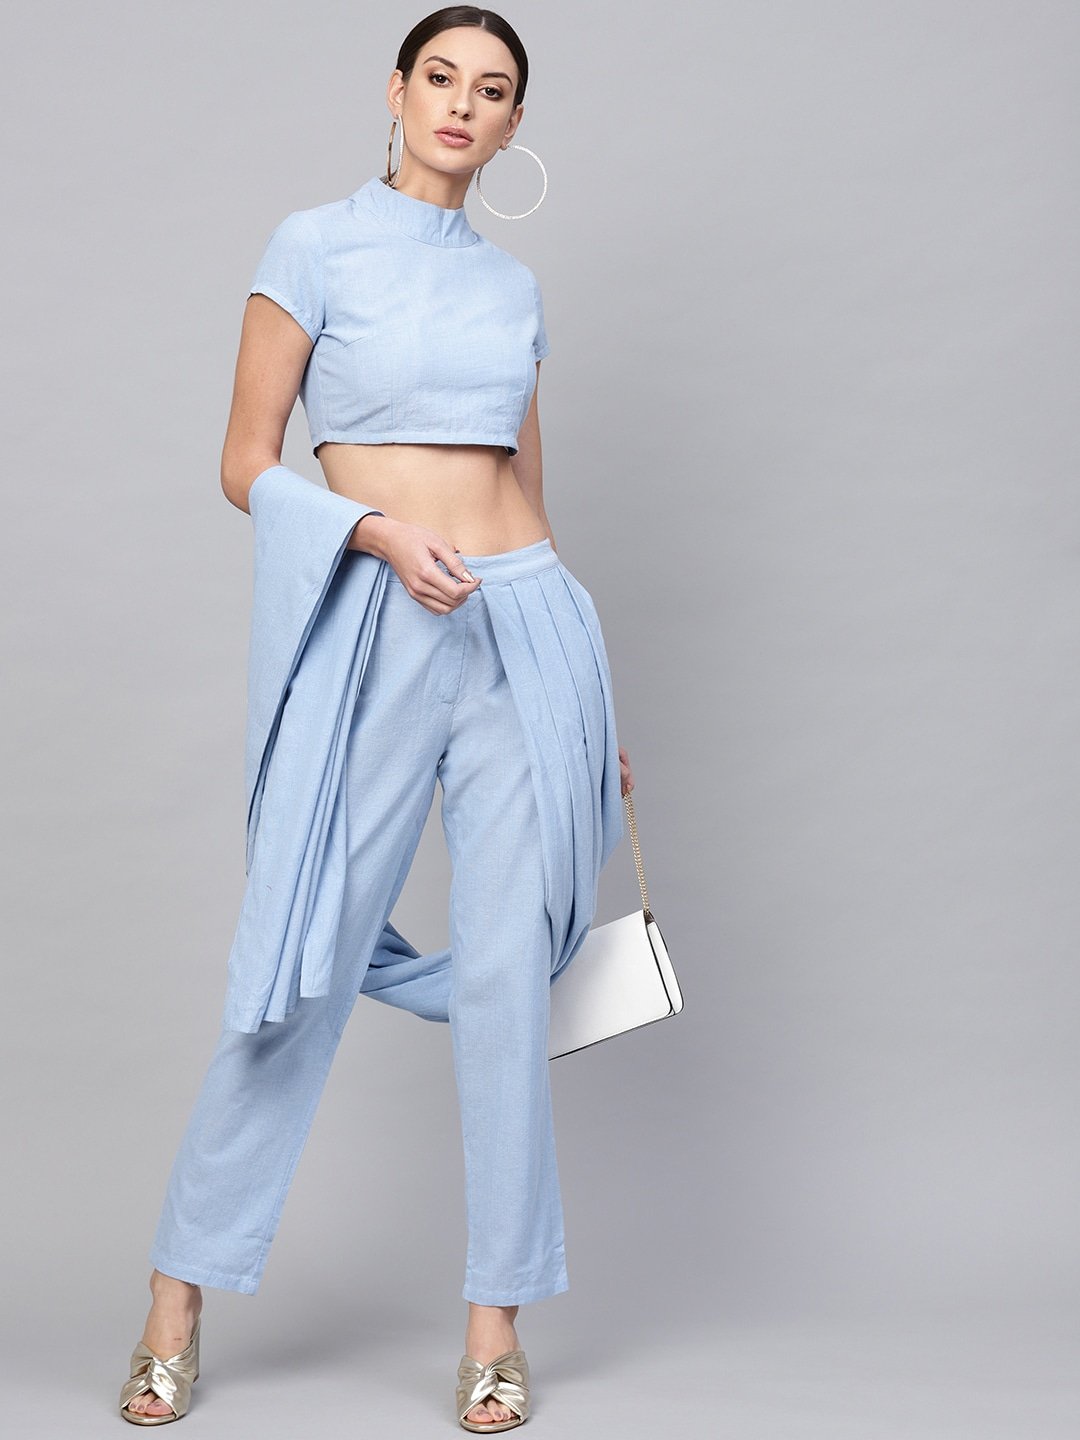 Women's  Solid Top with Trousers - AKS